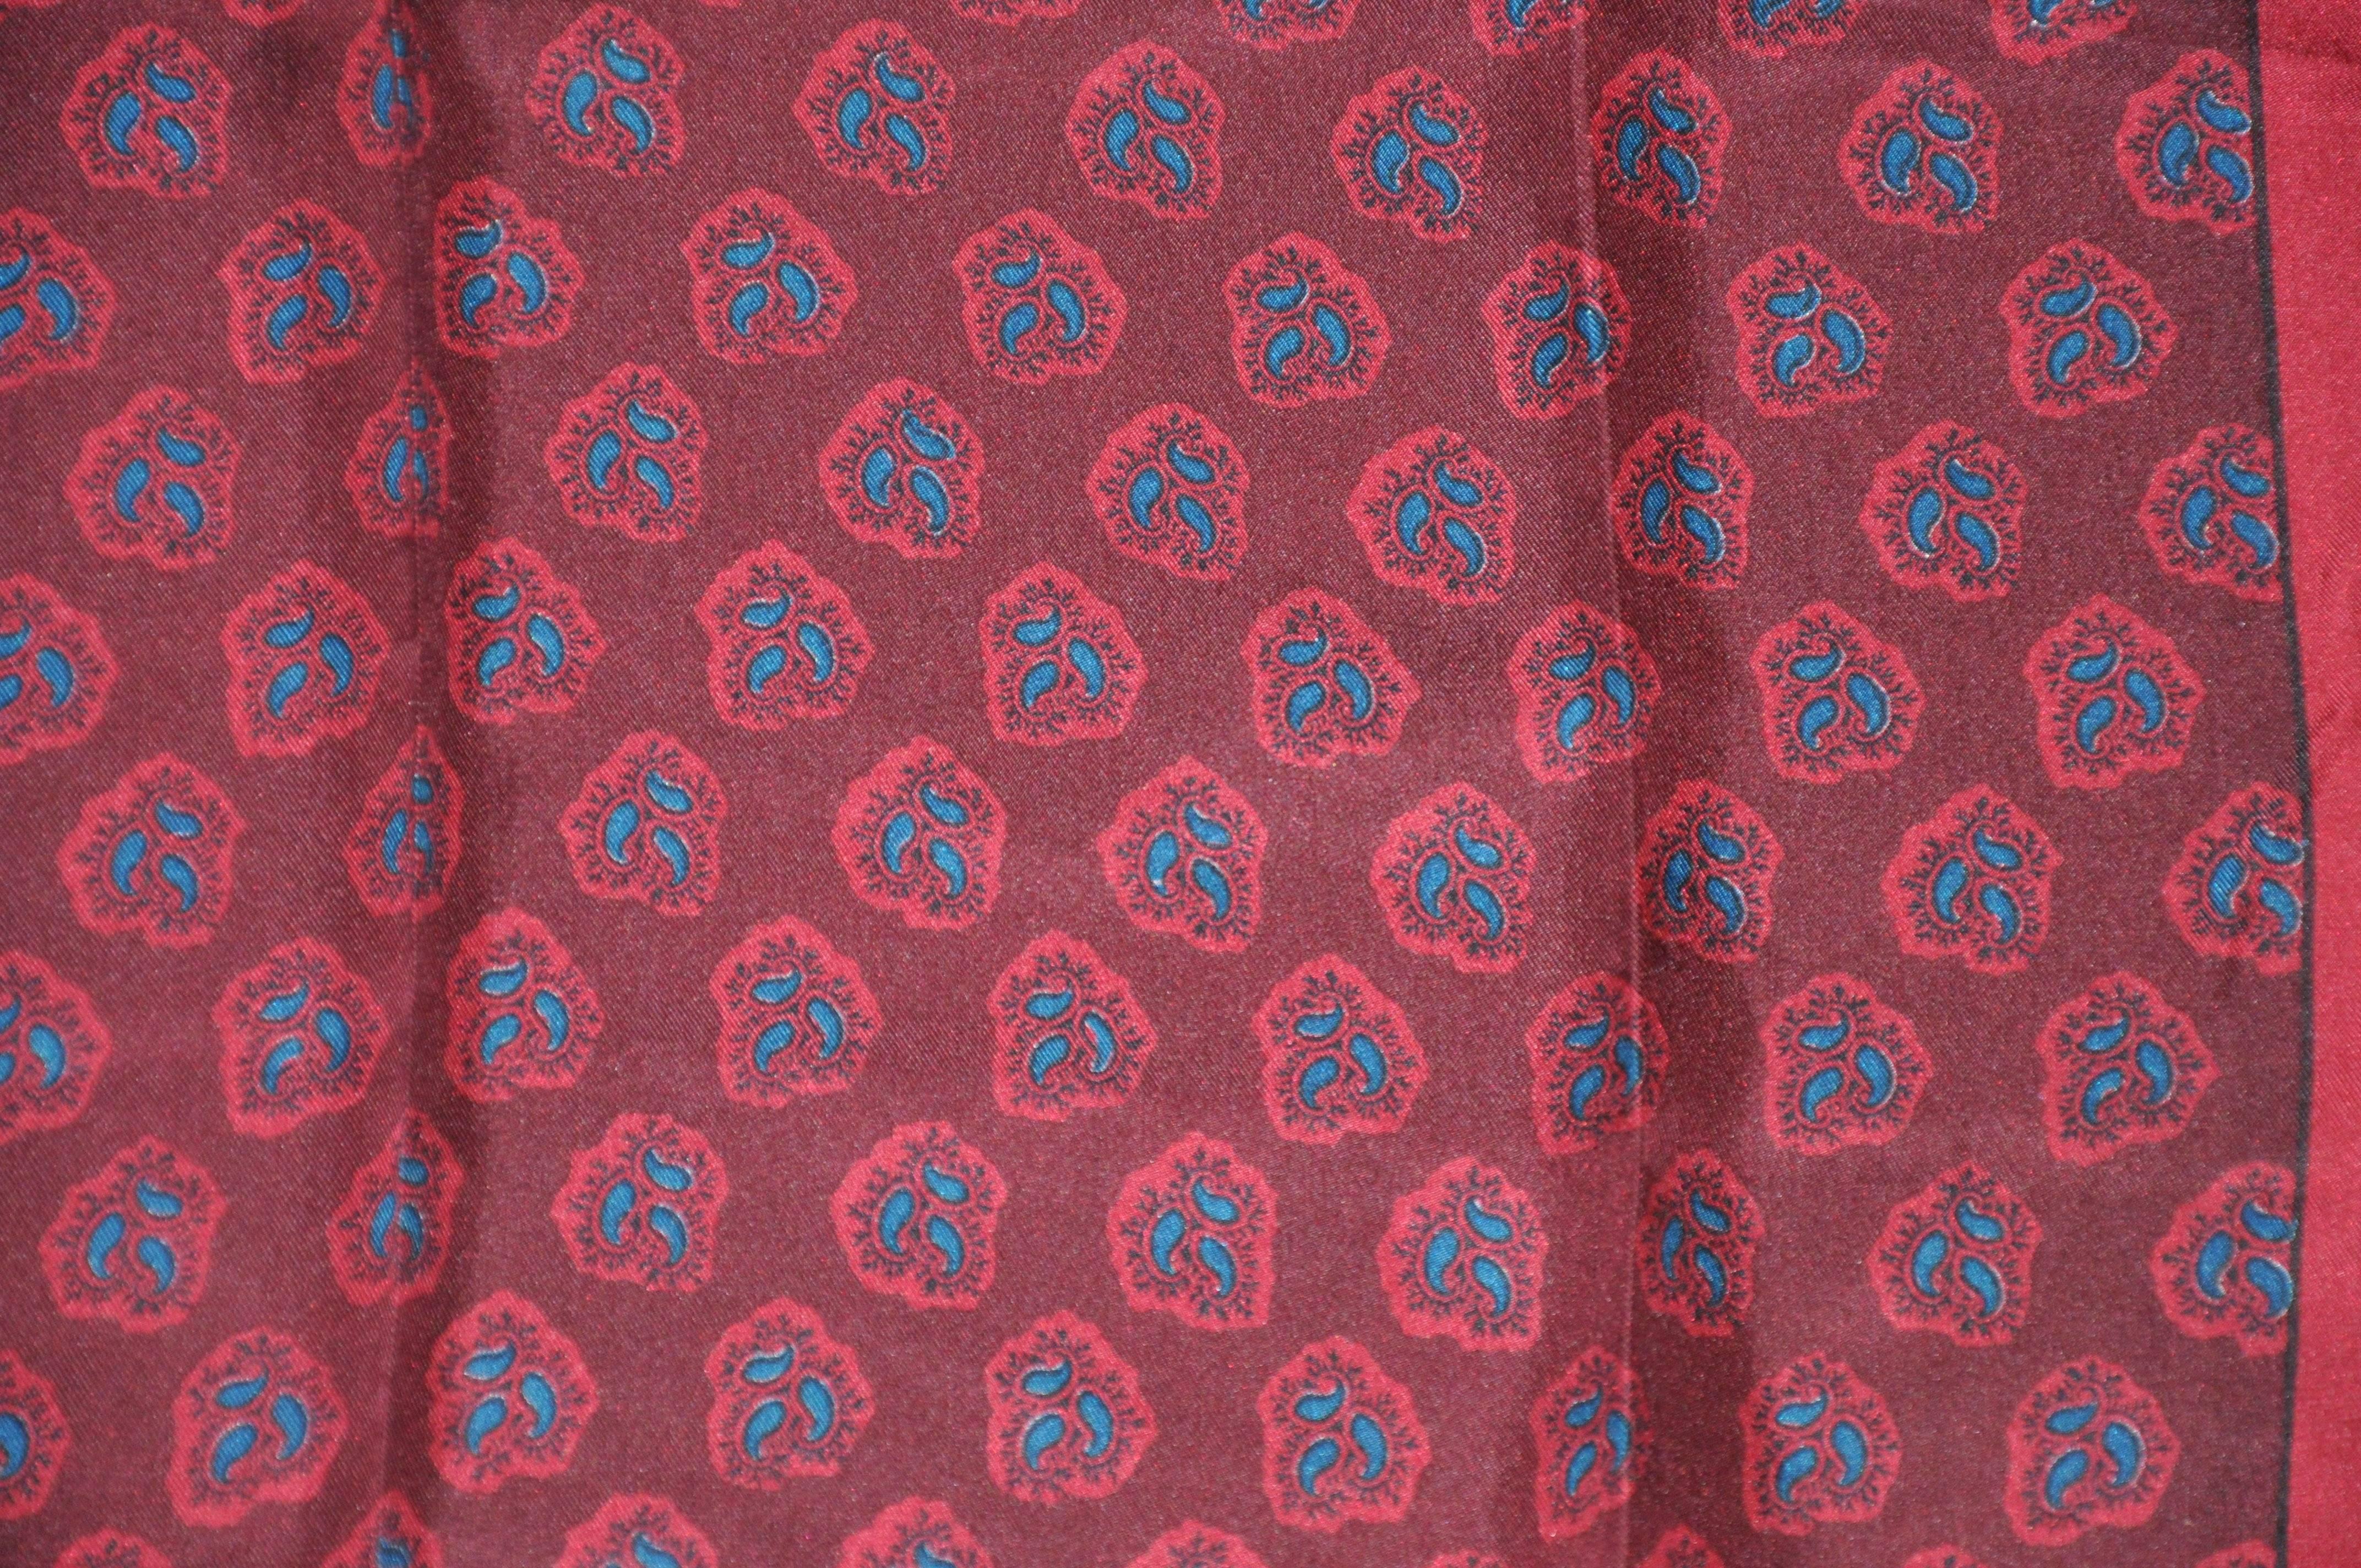 Liberty of London "Shades of burgundy" palsey silk scarf measures 23" x 24", finished with hand-rolled edges. Made in England.